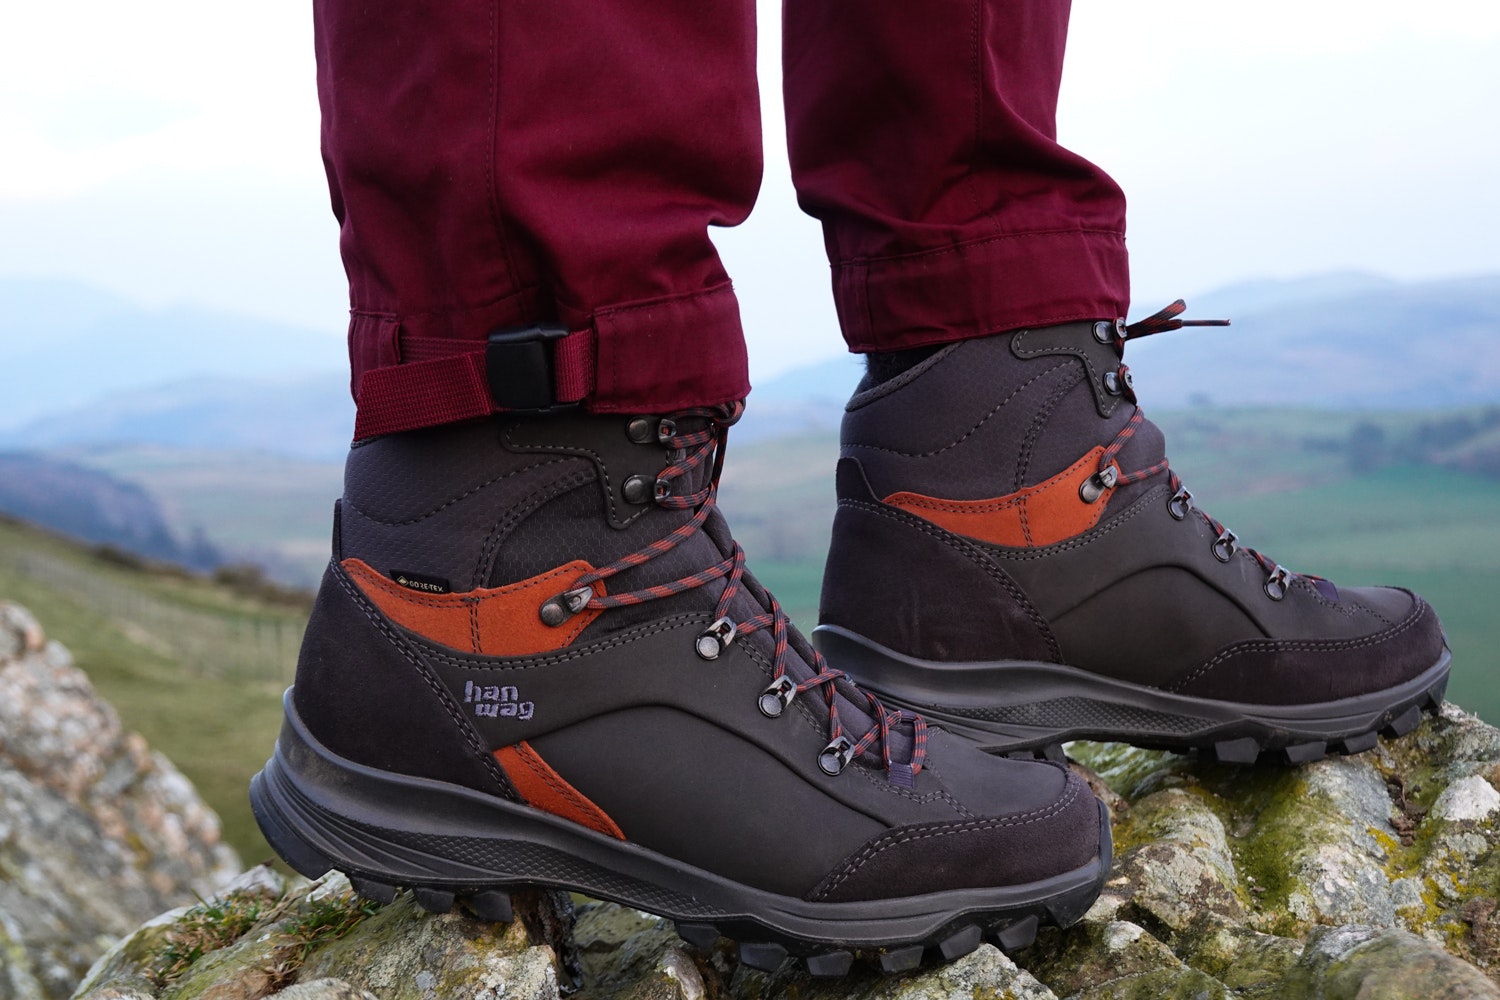 Which Hiking Boots Are Ideal For Gorilla Trekking